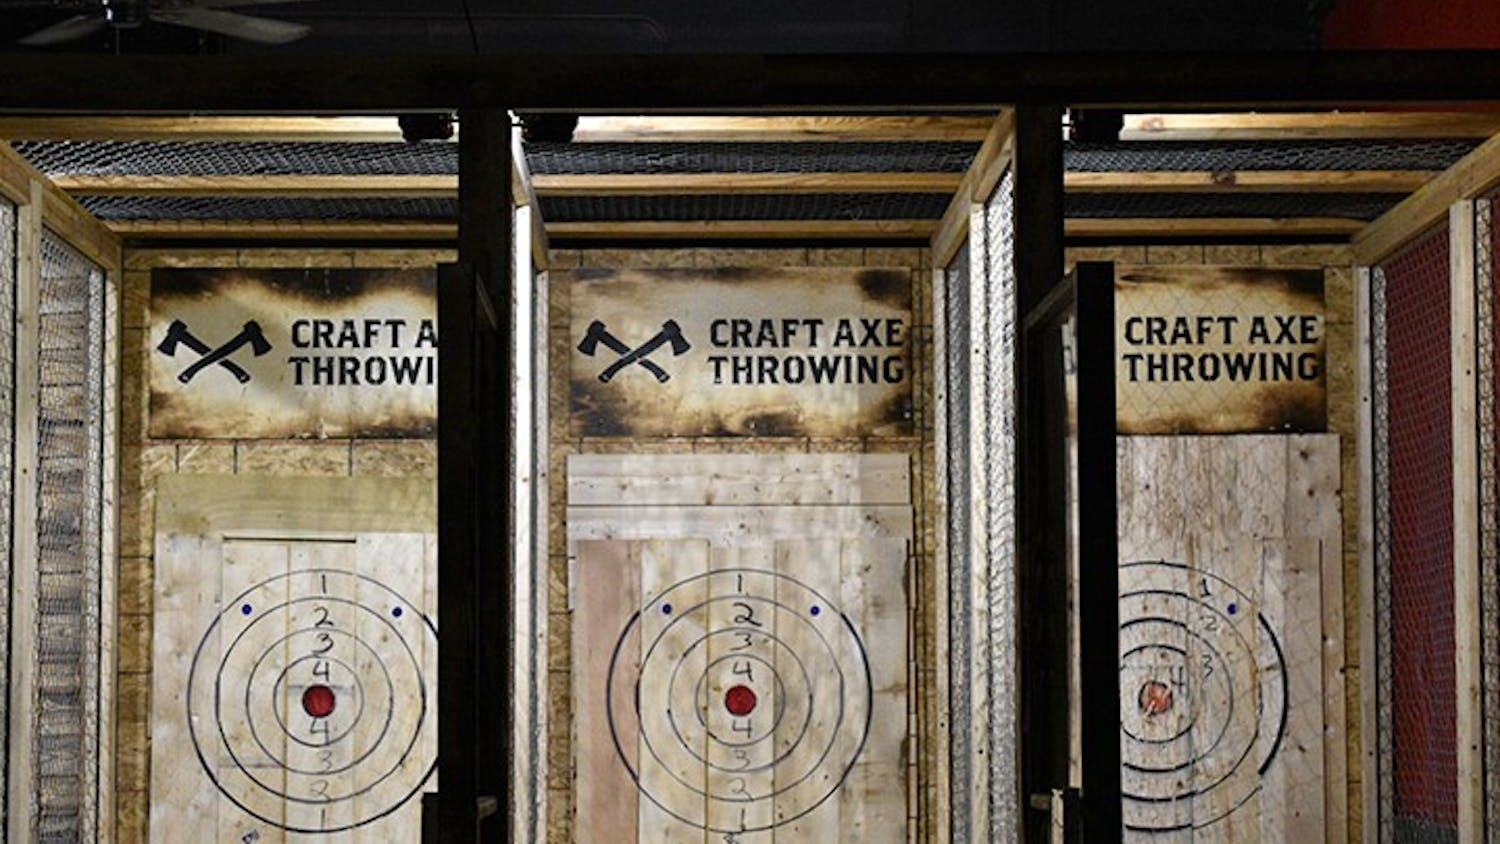 Craft Axe Throwing has divided lanes with bullseye's for customers to throw at.